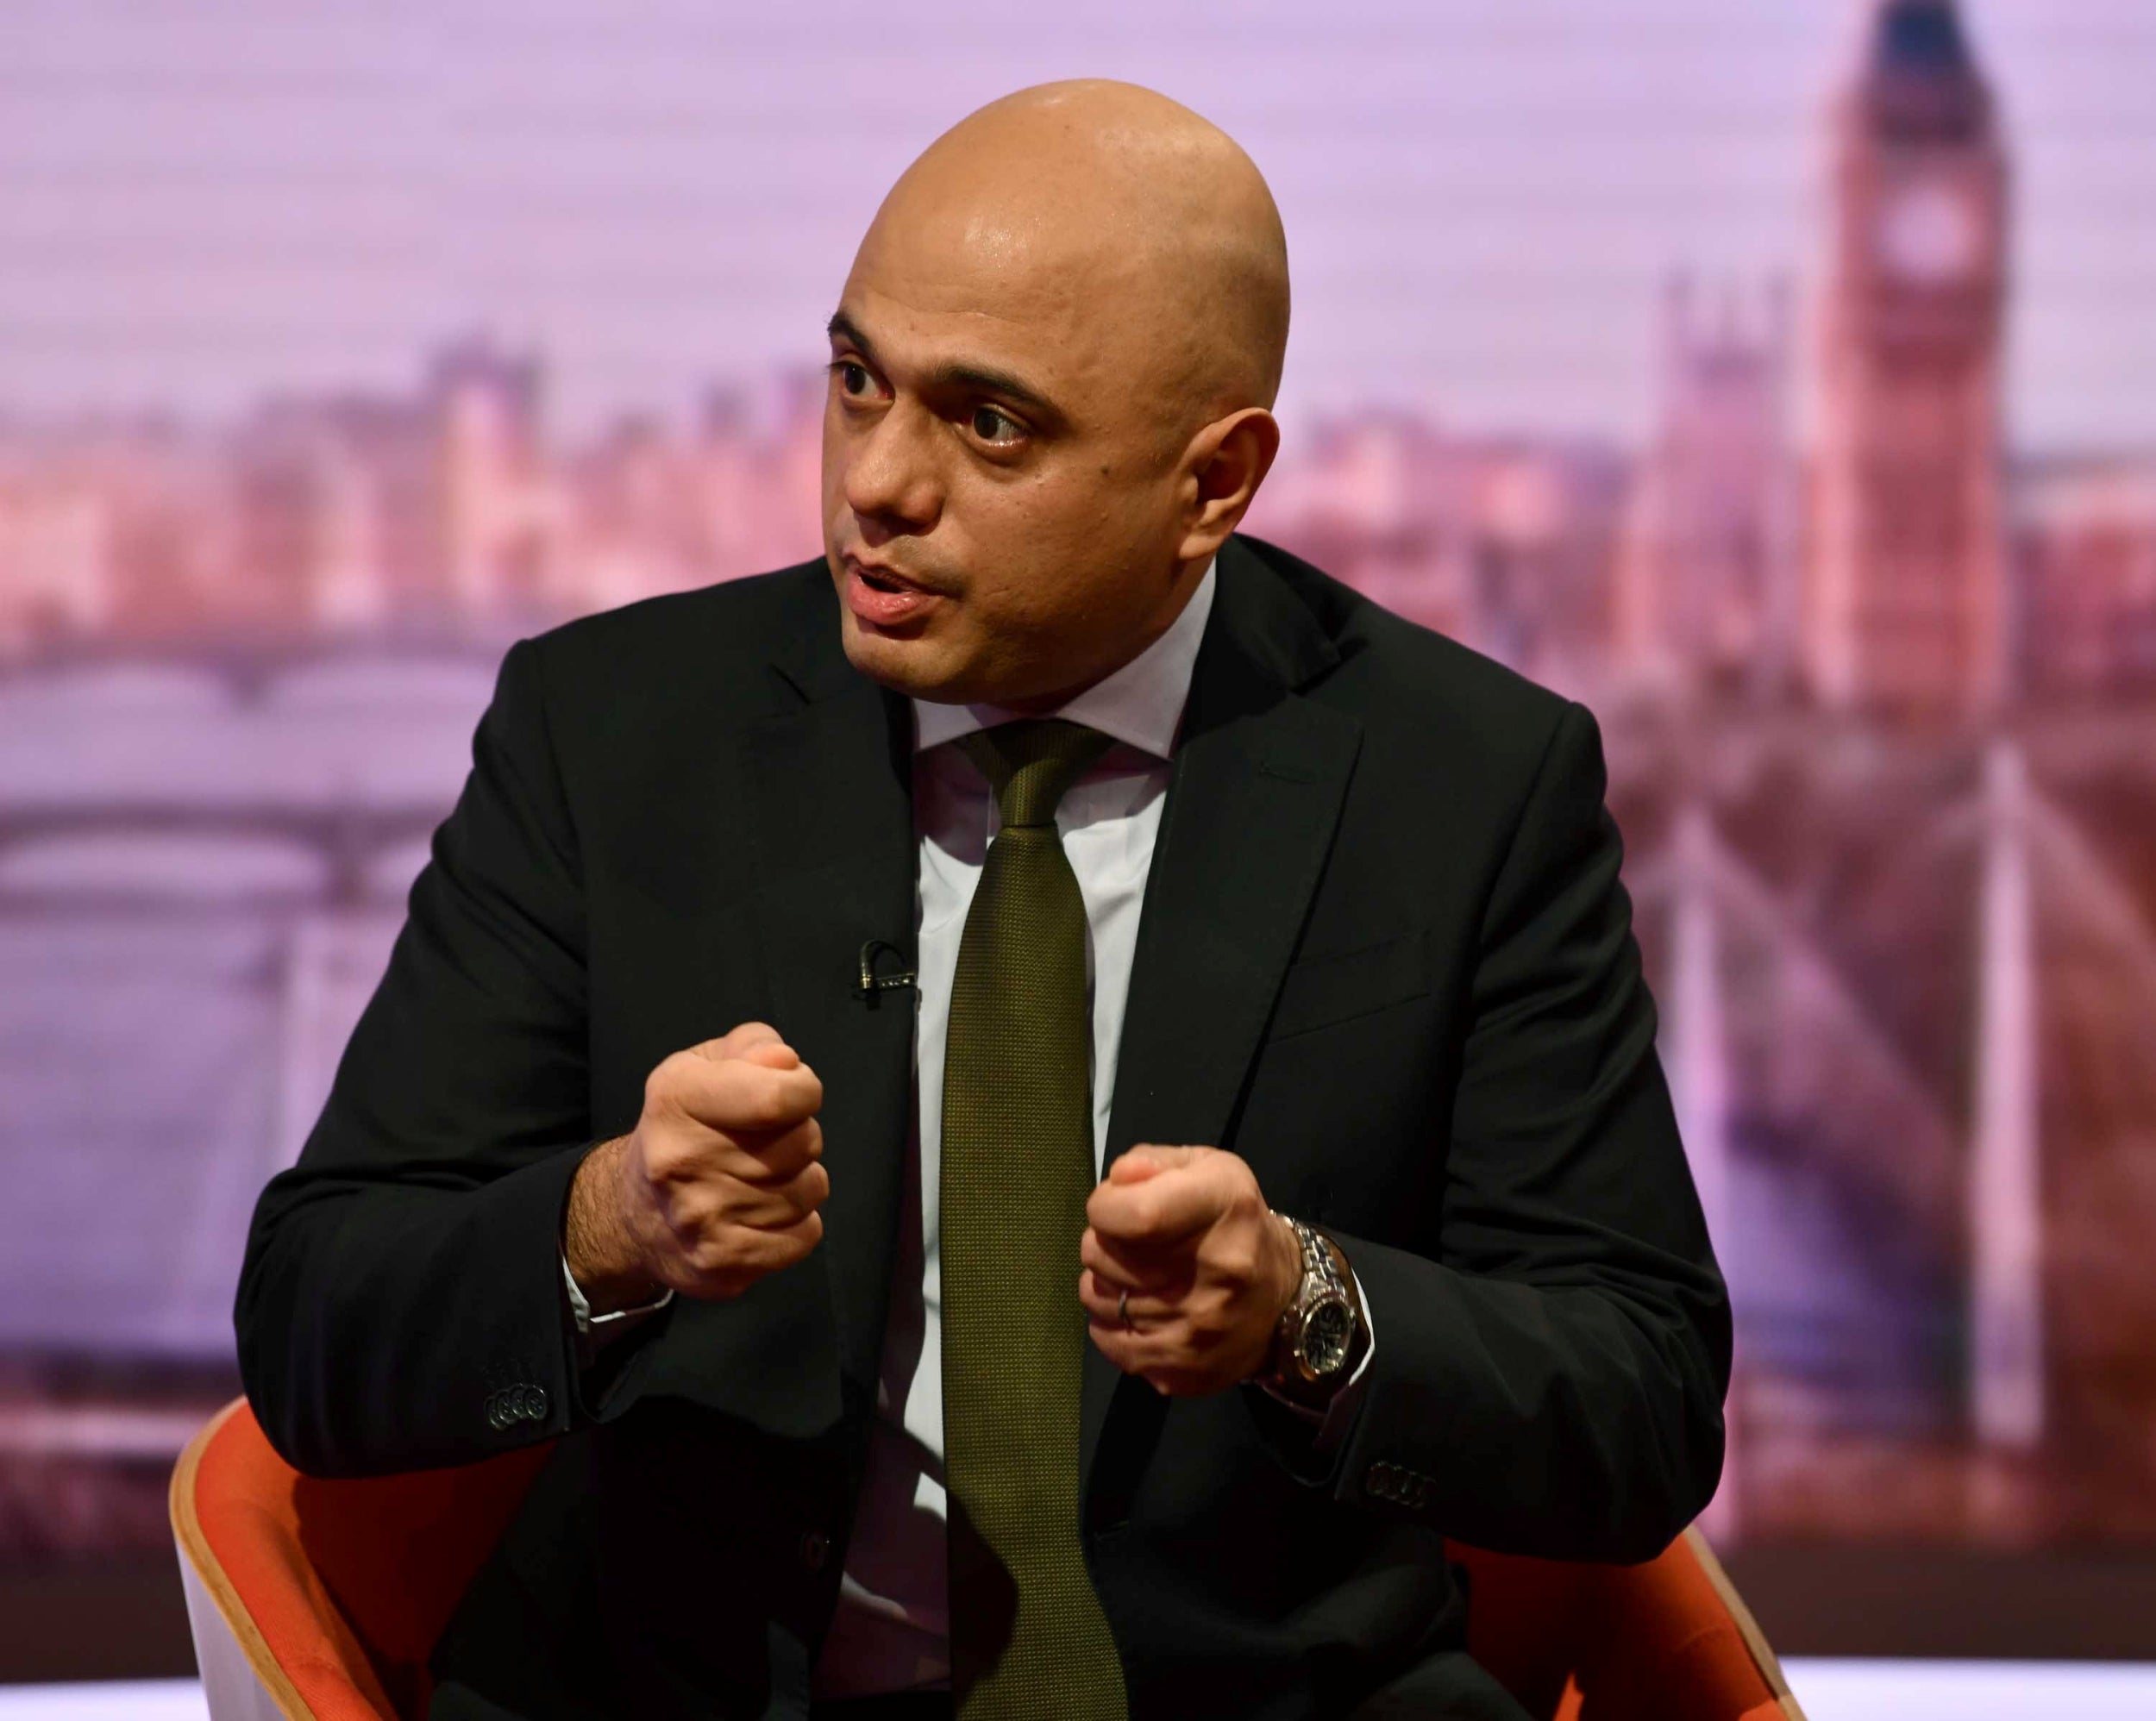 Can Sajid Javid get a grip on the scourge of knife crime?